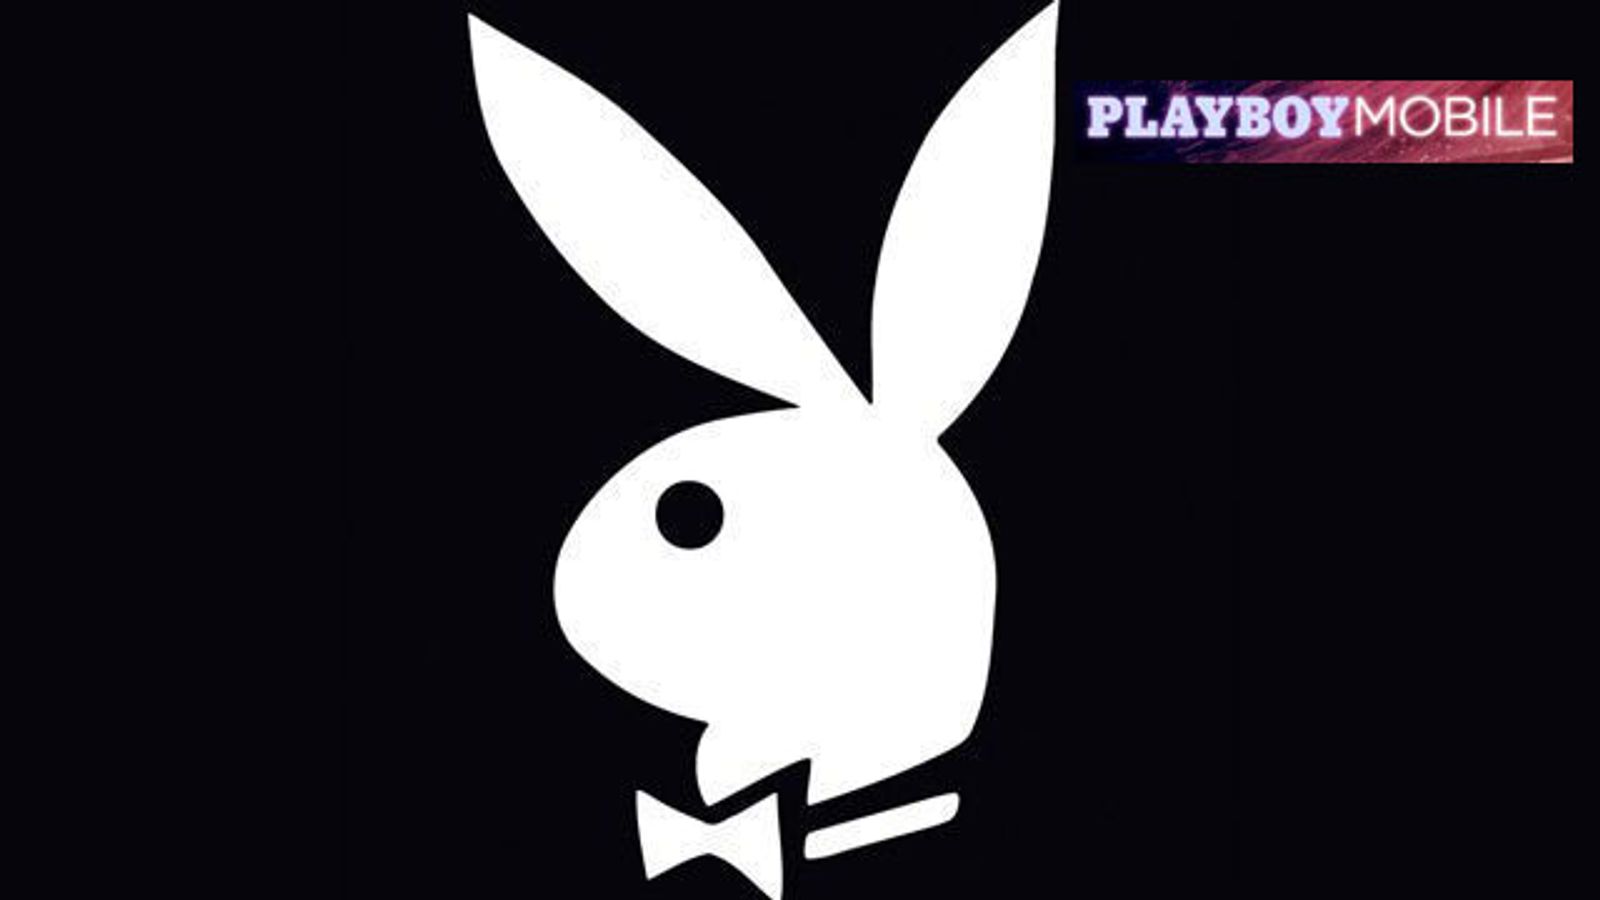 Playboy Launches Affiliate Mobile Site, Playboy.mobi